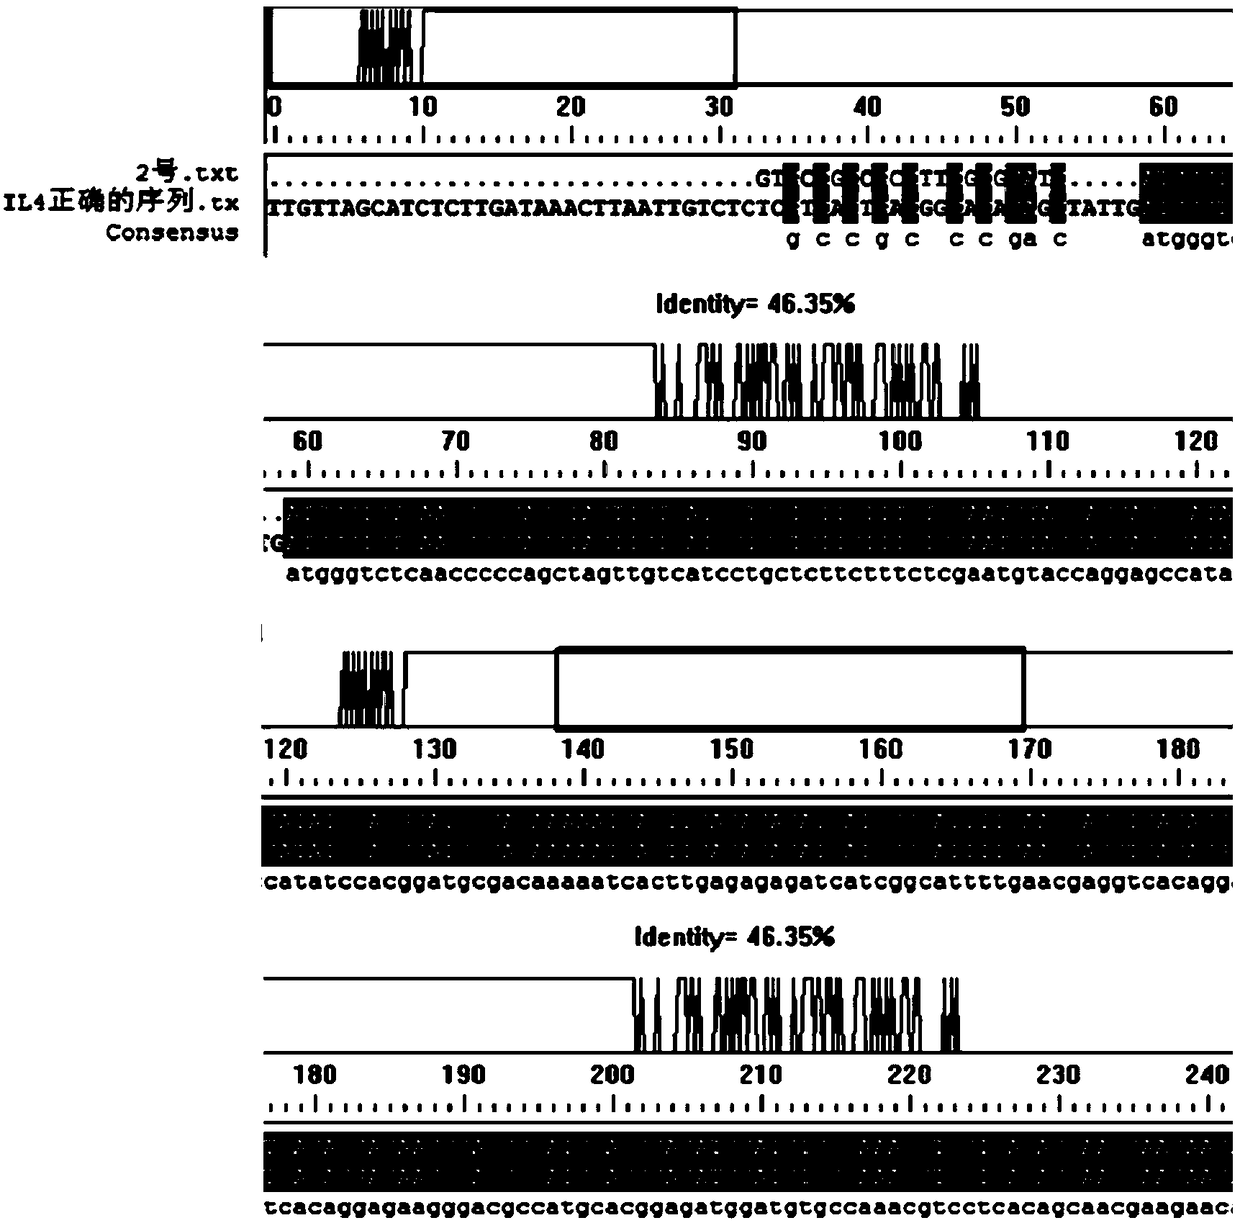 Recombinant adeno-associated virus expressing IL-4 and preparation method and application thereof